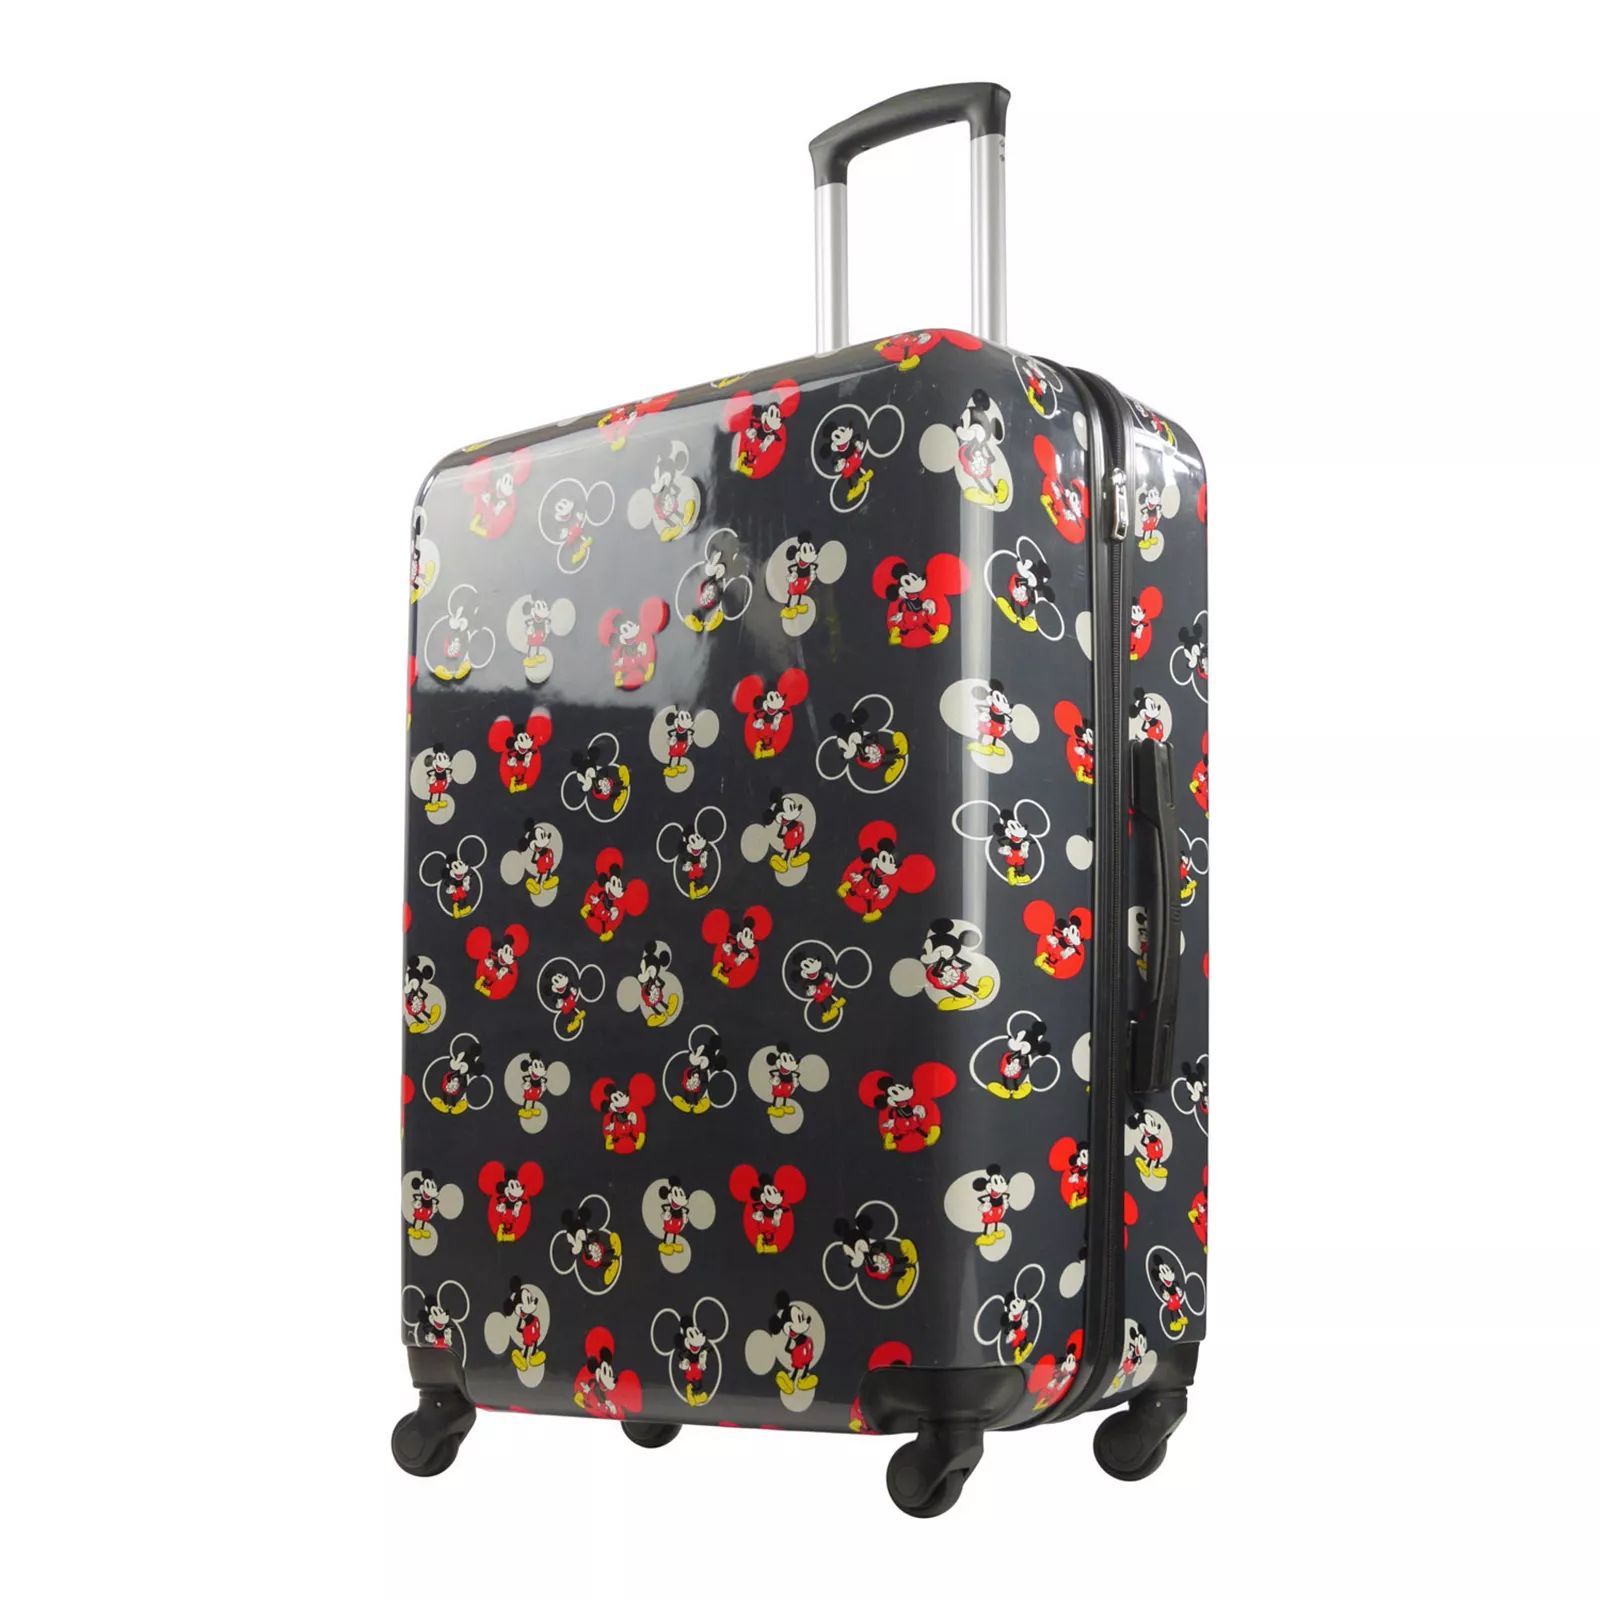 Disney by Ful Mickey Mouse Hardside Spinner Luggage, Grey, 21 Carryon | Kohl's